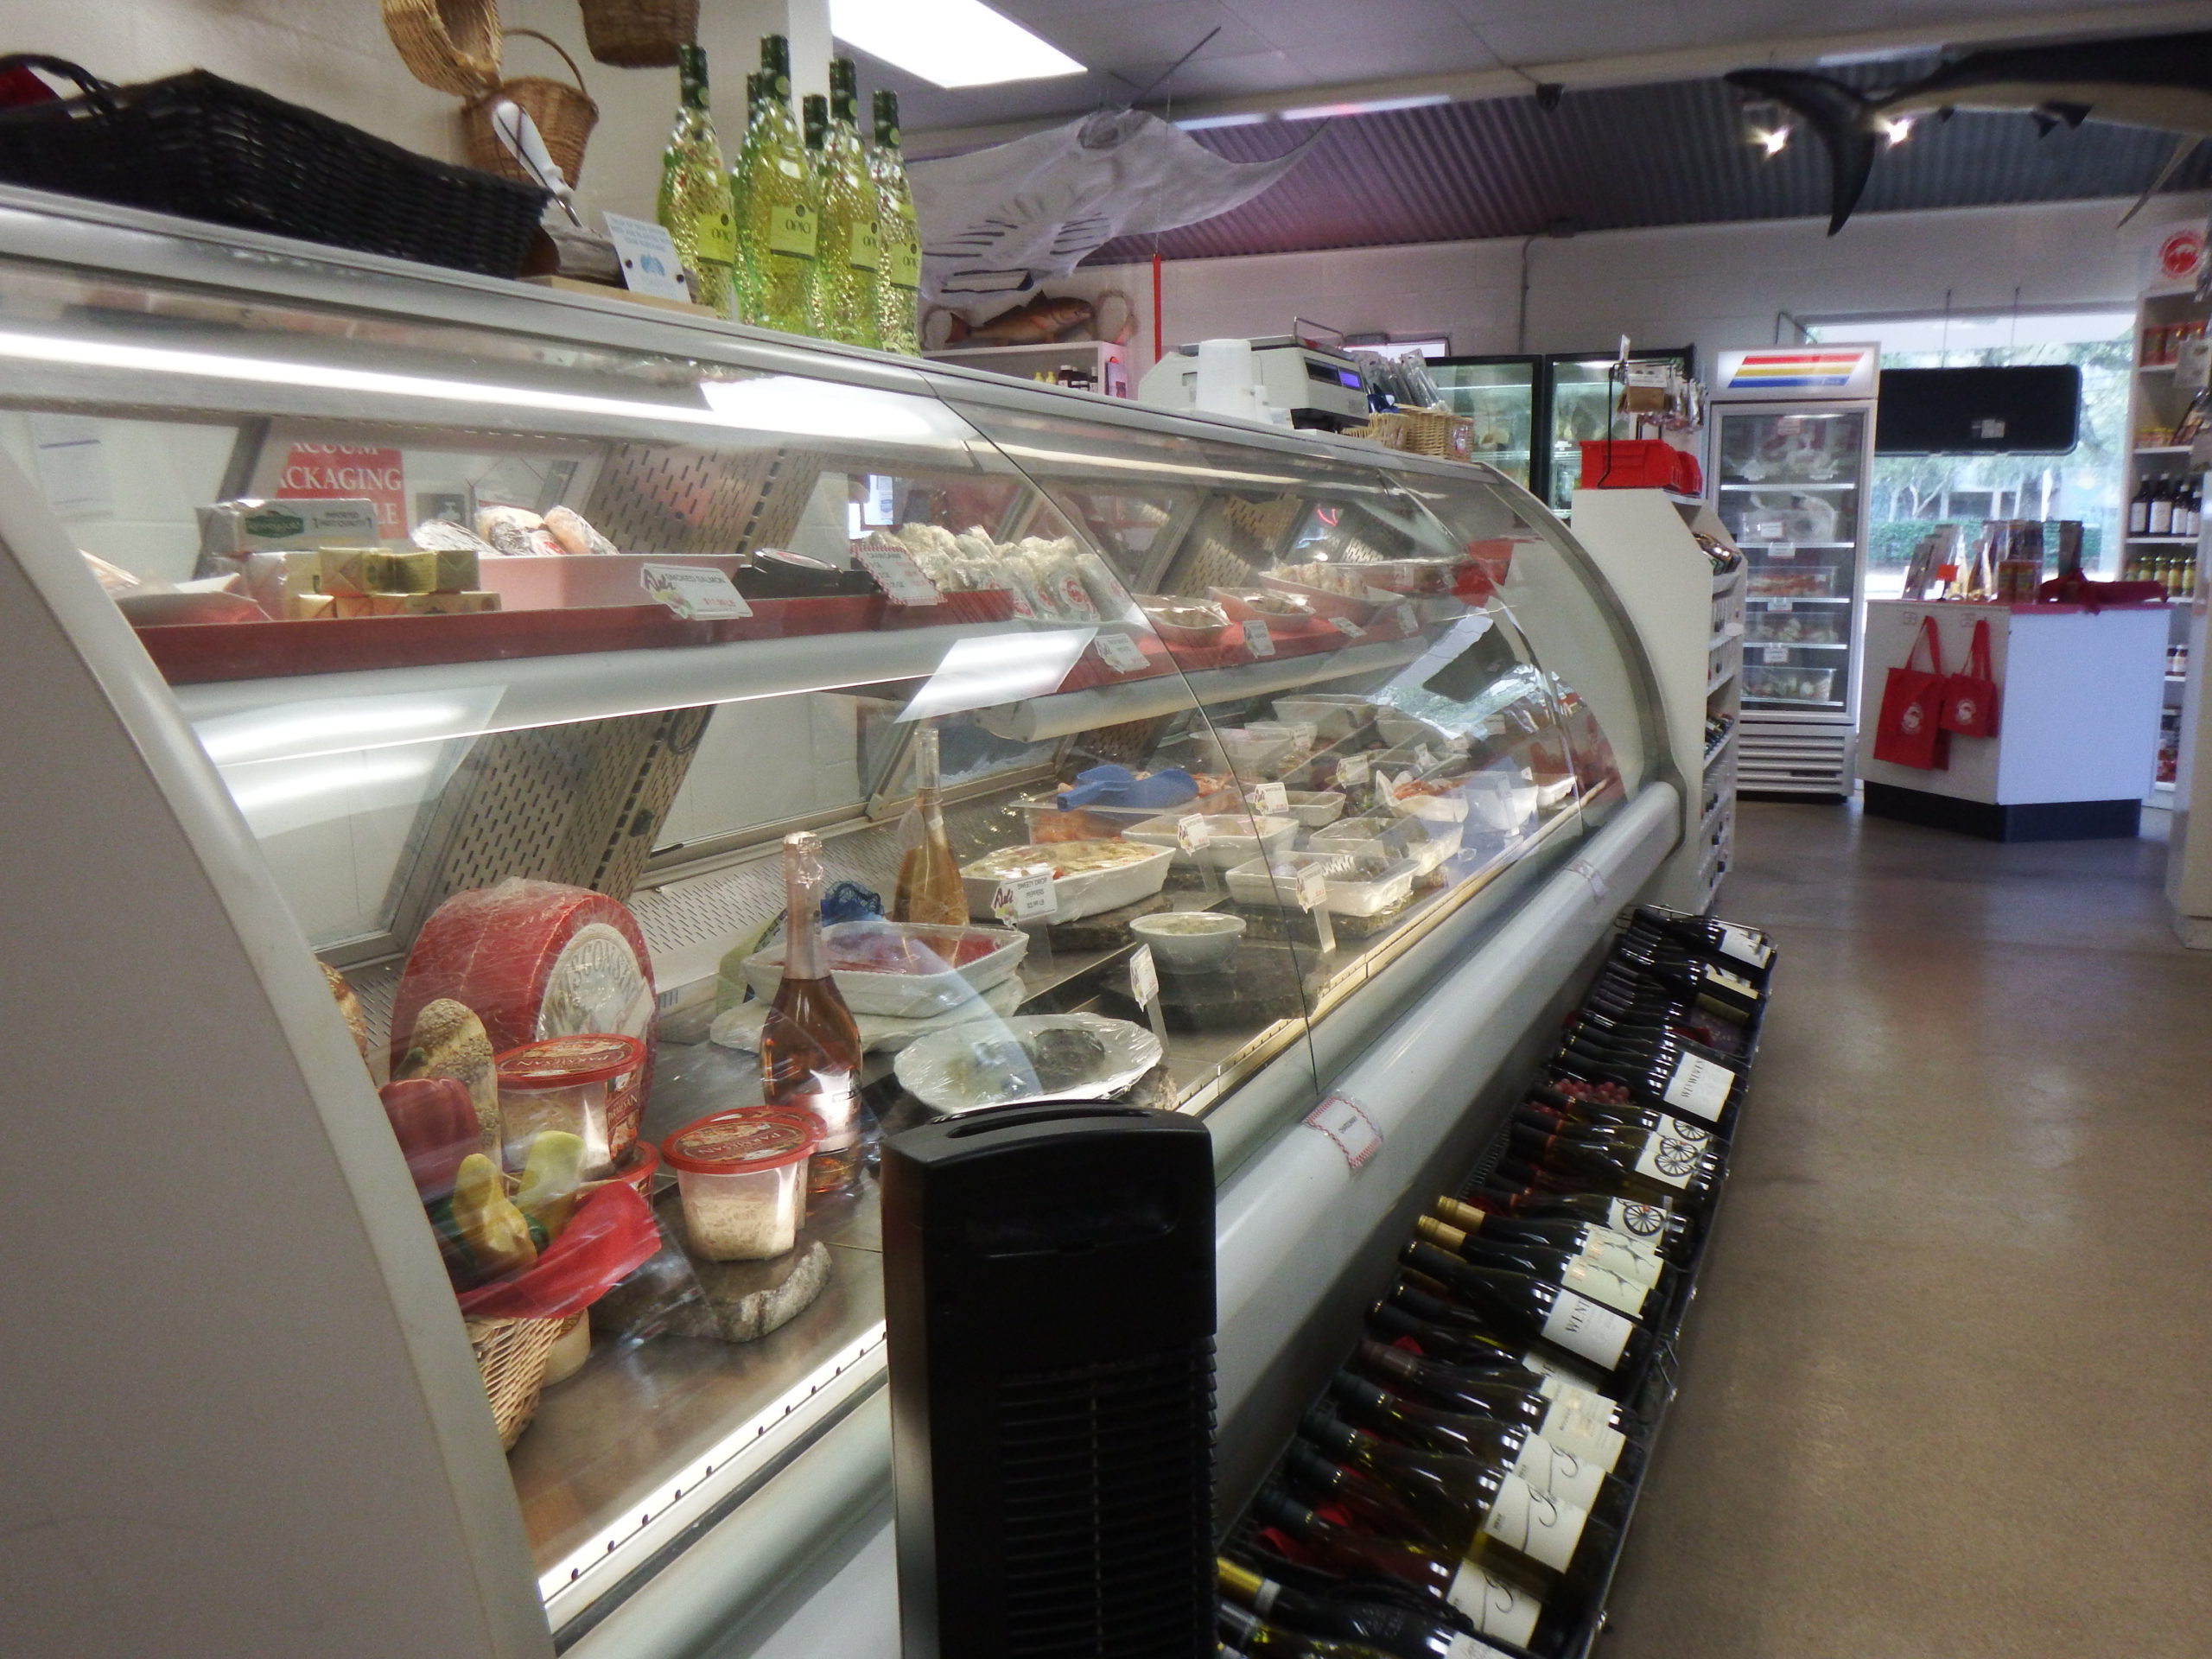 prepared foods in deli case with wine display at Destin Ice Seafood Market